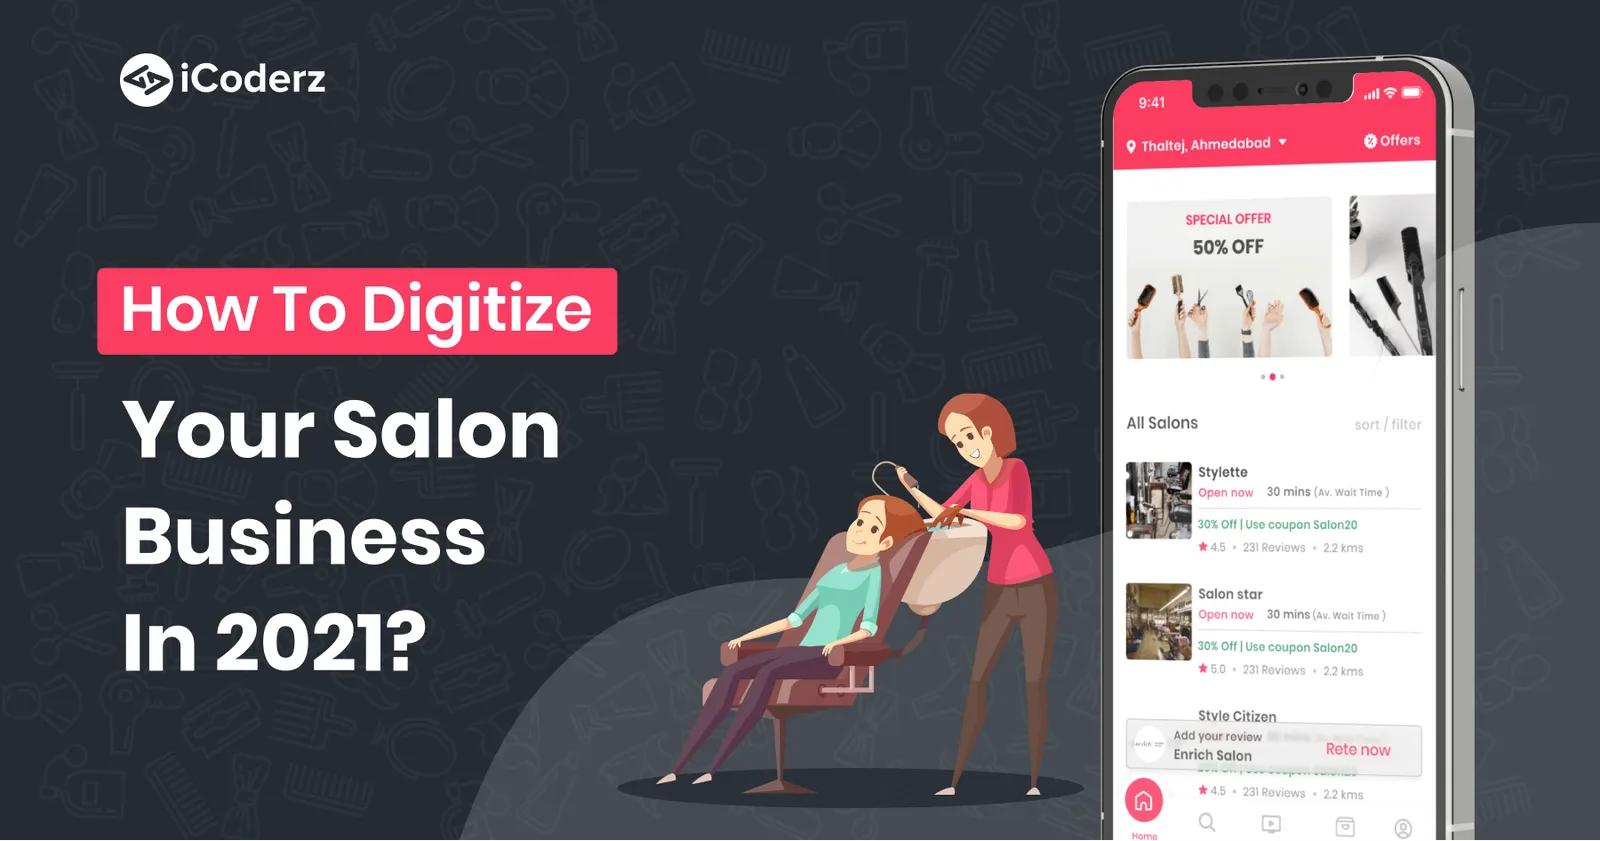 How To Digitize Your Salon Business In 2021?